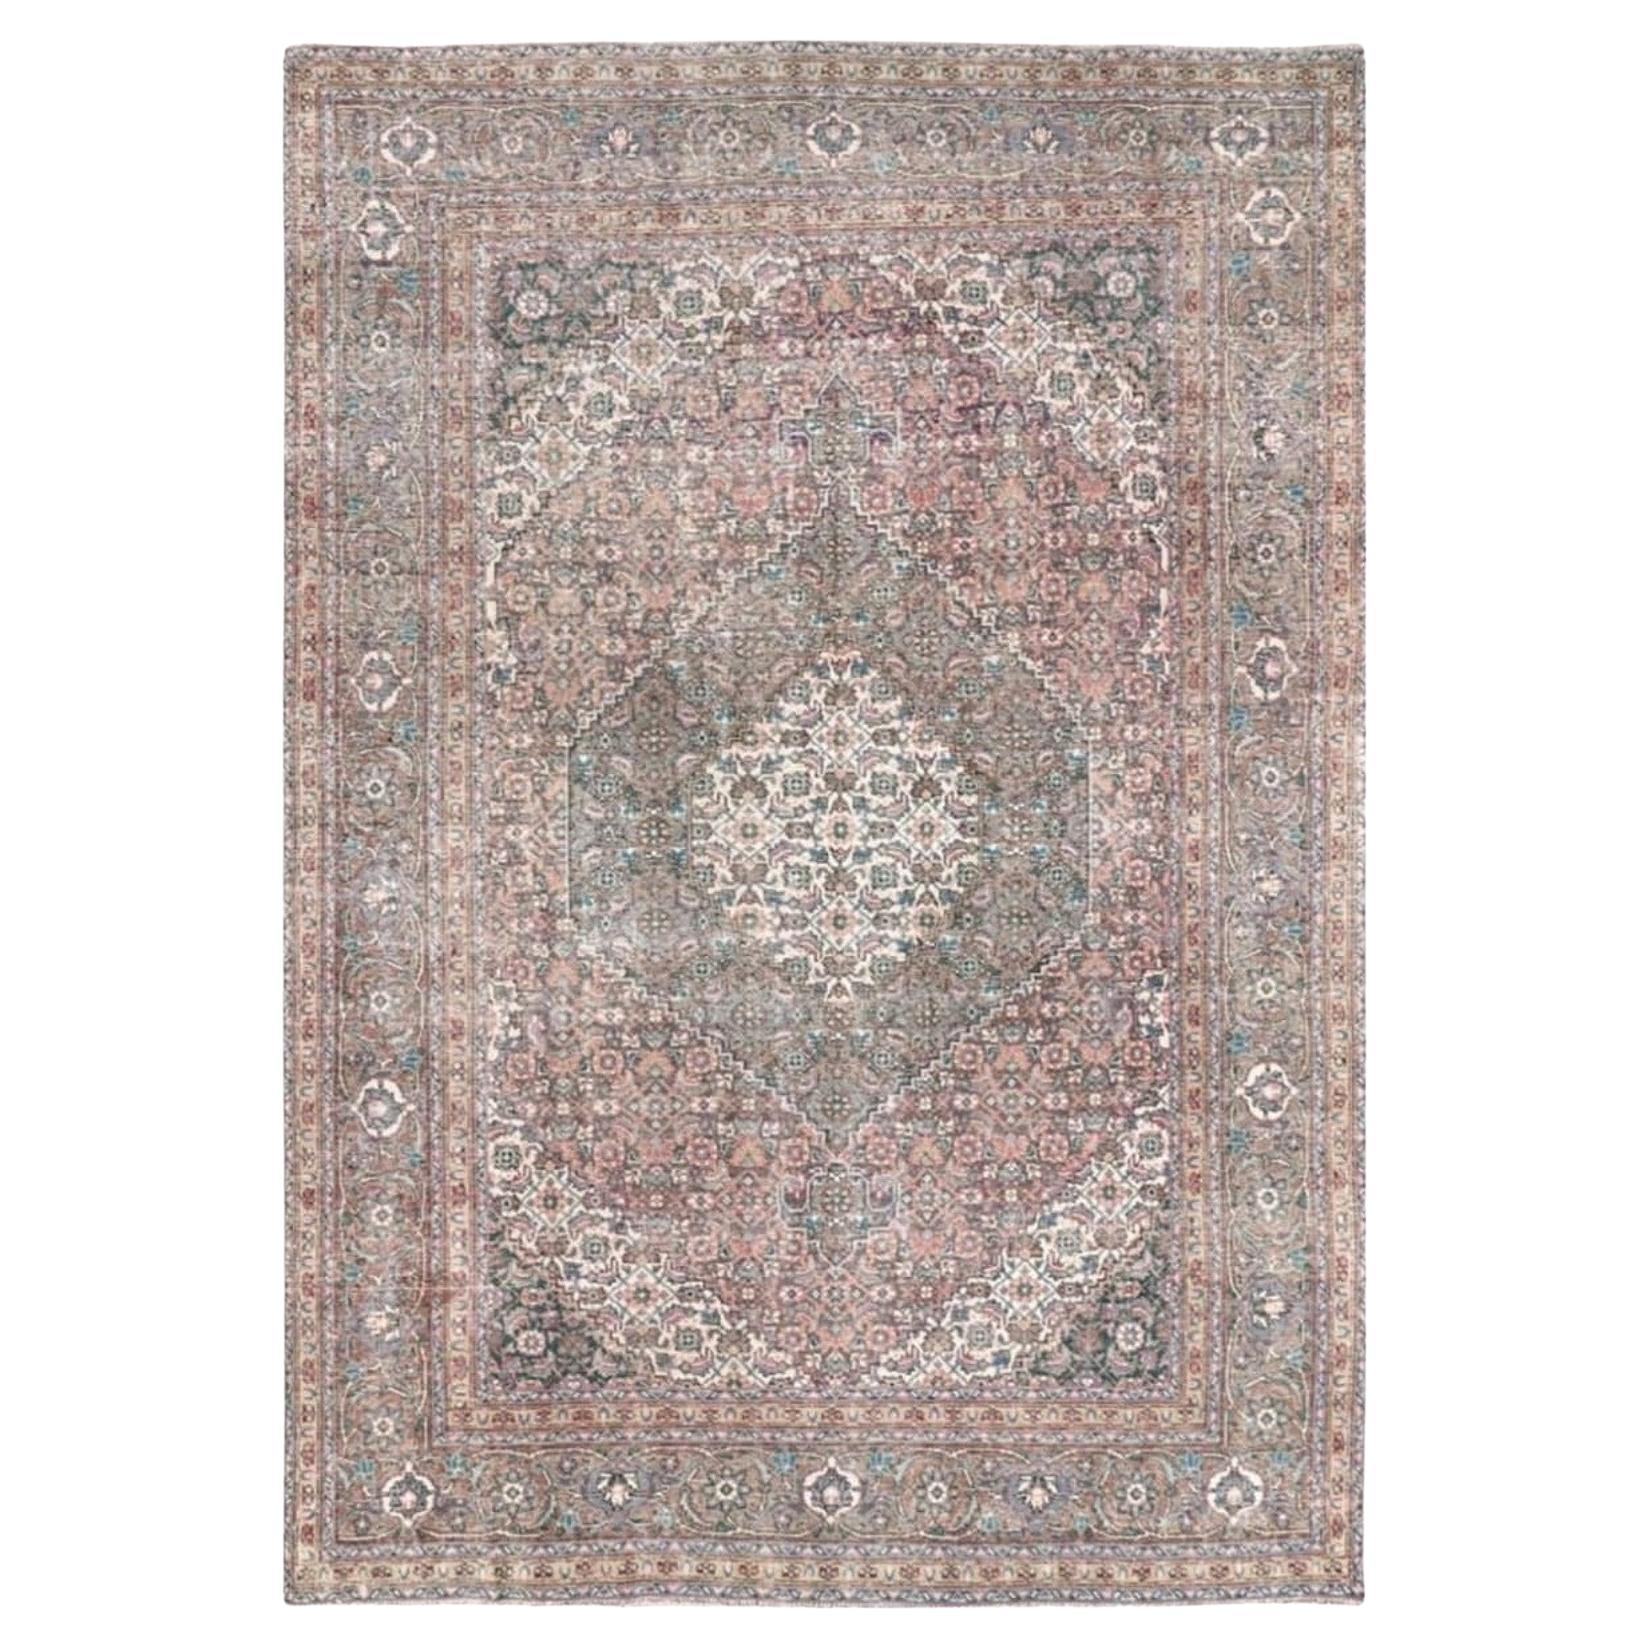  Tabriz Vintage Rug 8x12 ft Hand Knotted Room Size Wool Muted Colors 360x250 cm For Sale